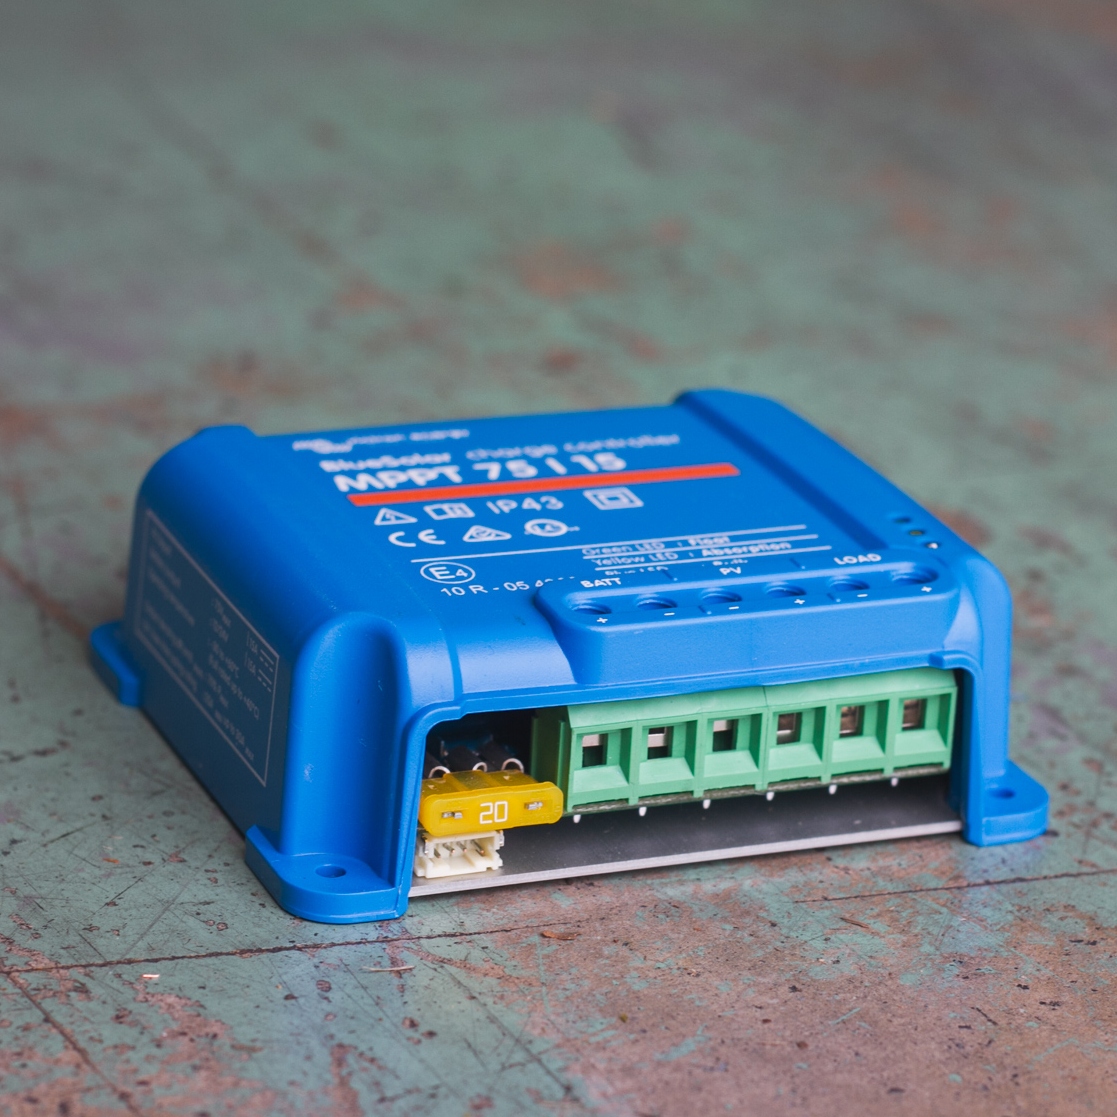 The Victron MPPT 75/15 - BlueSolar Charge Controller features multiple green connection terminals, all set against a weathered blue surface.